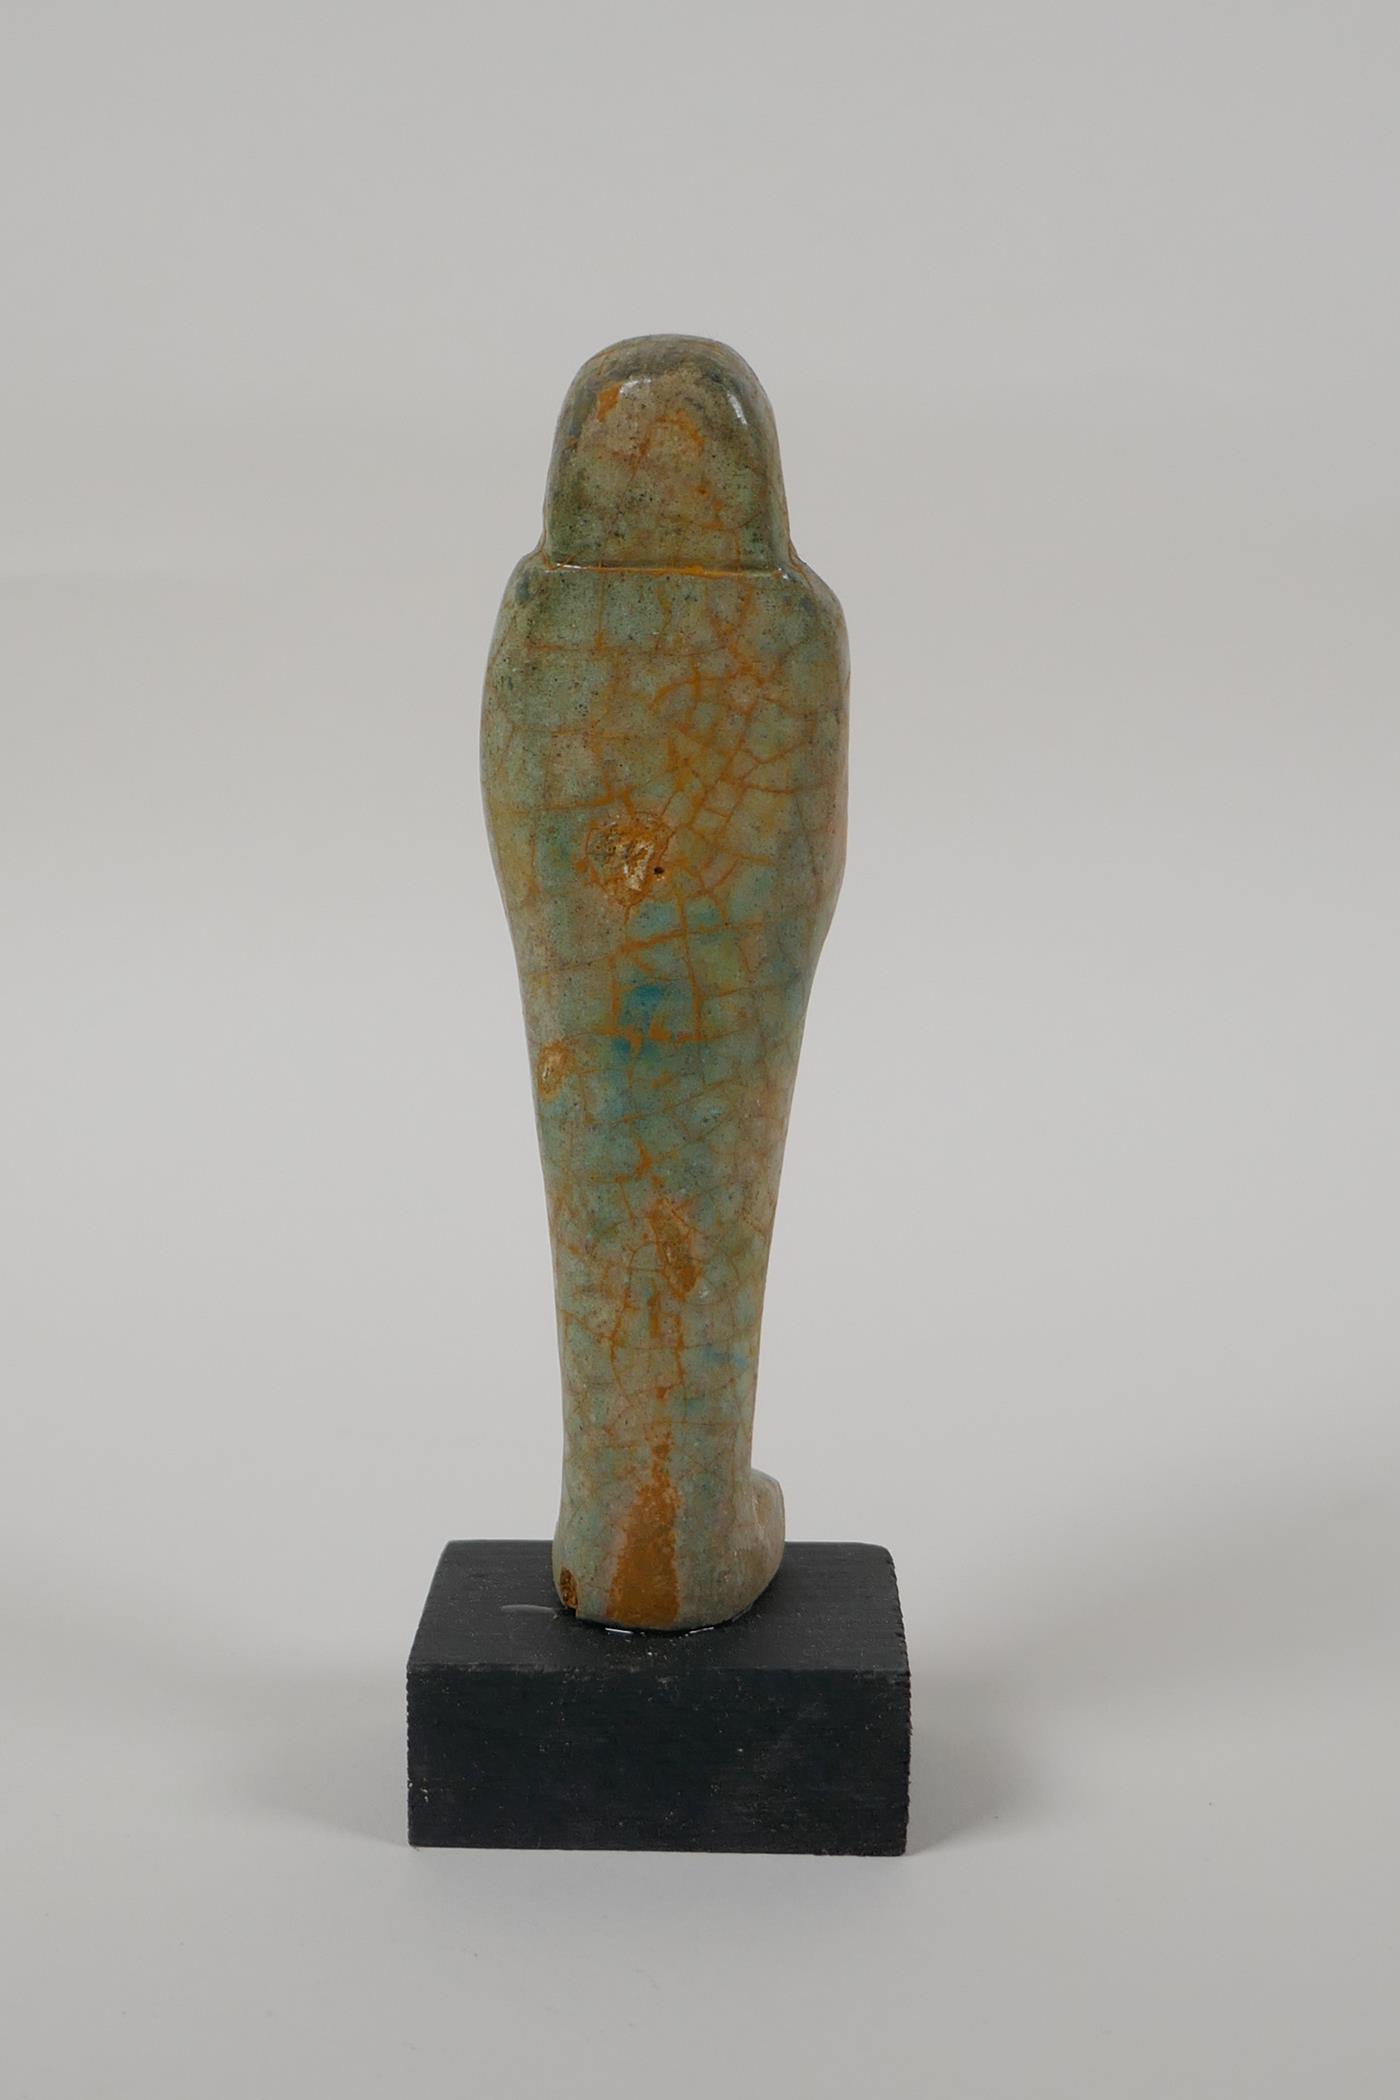 An Egyptian turquoise glazed faience shabti, mounted on a display base, 6" high - Image 4 of 6